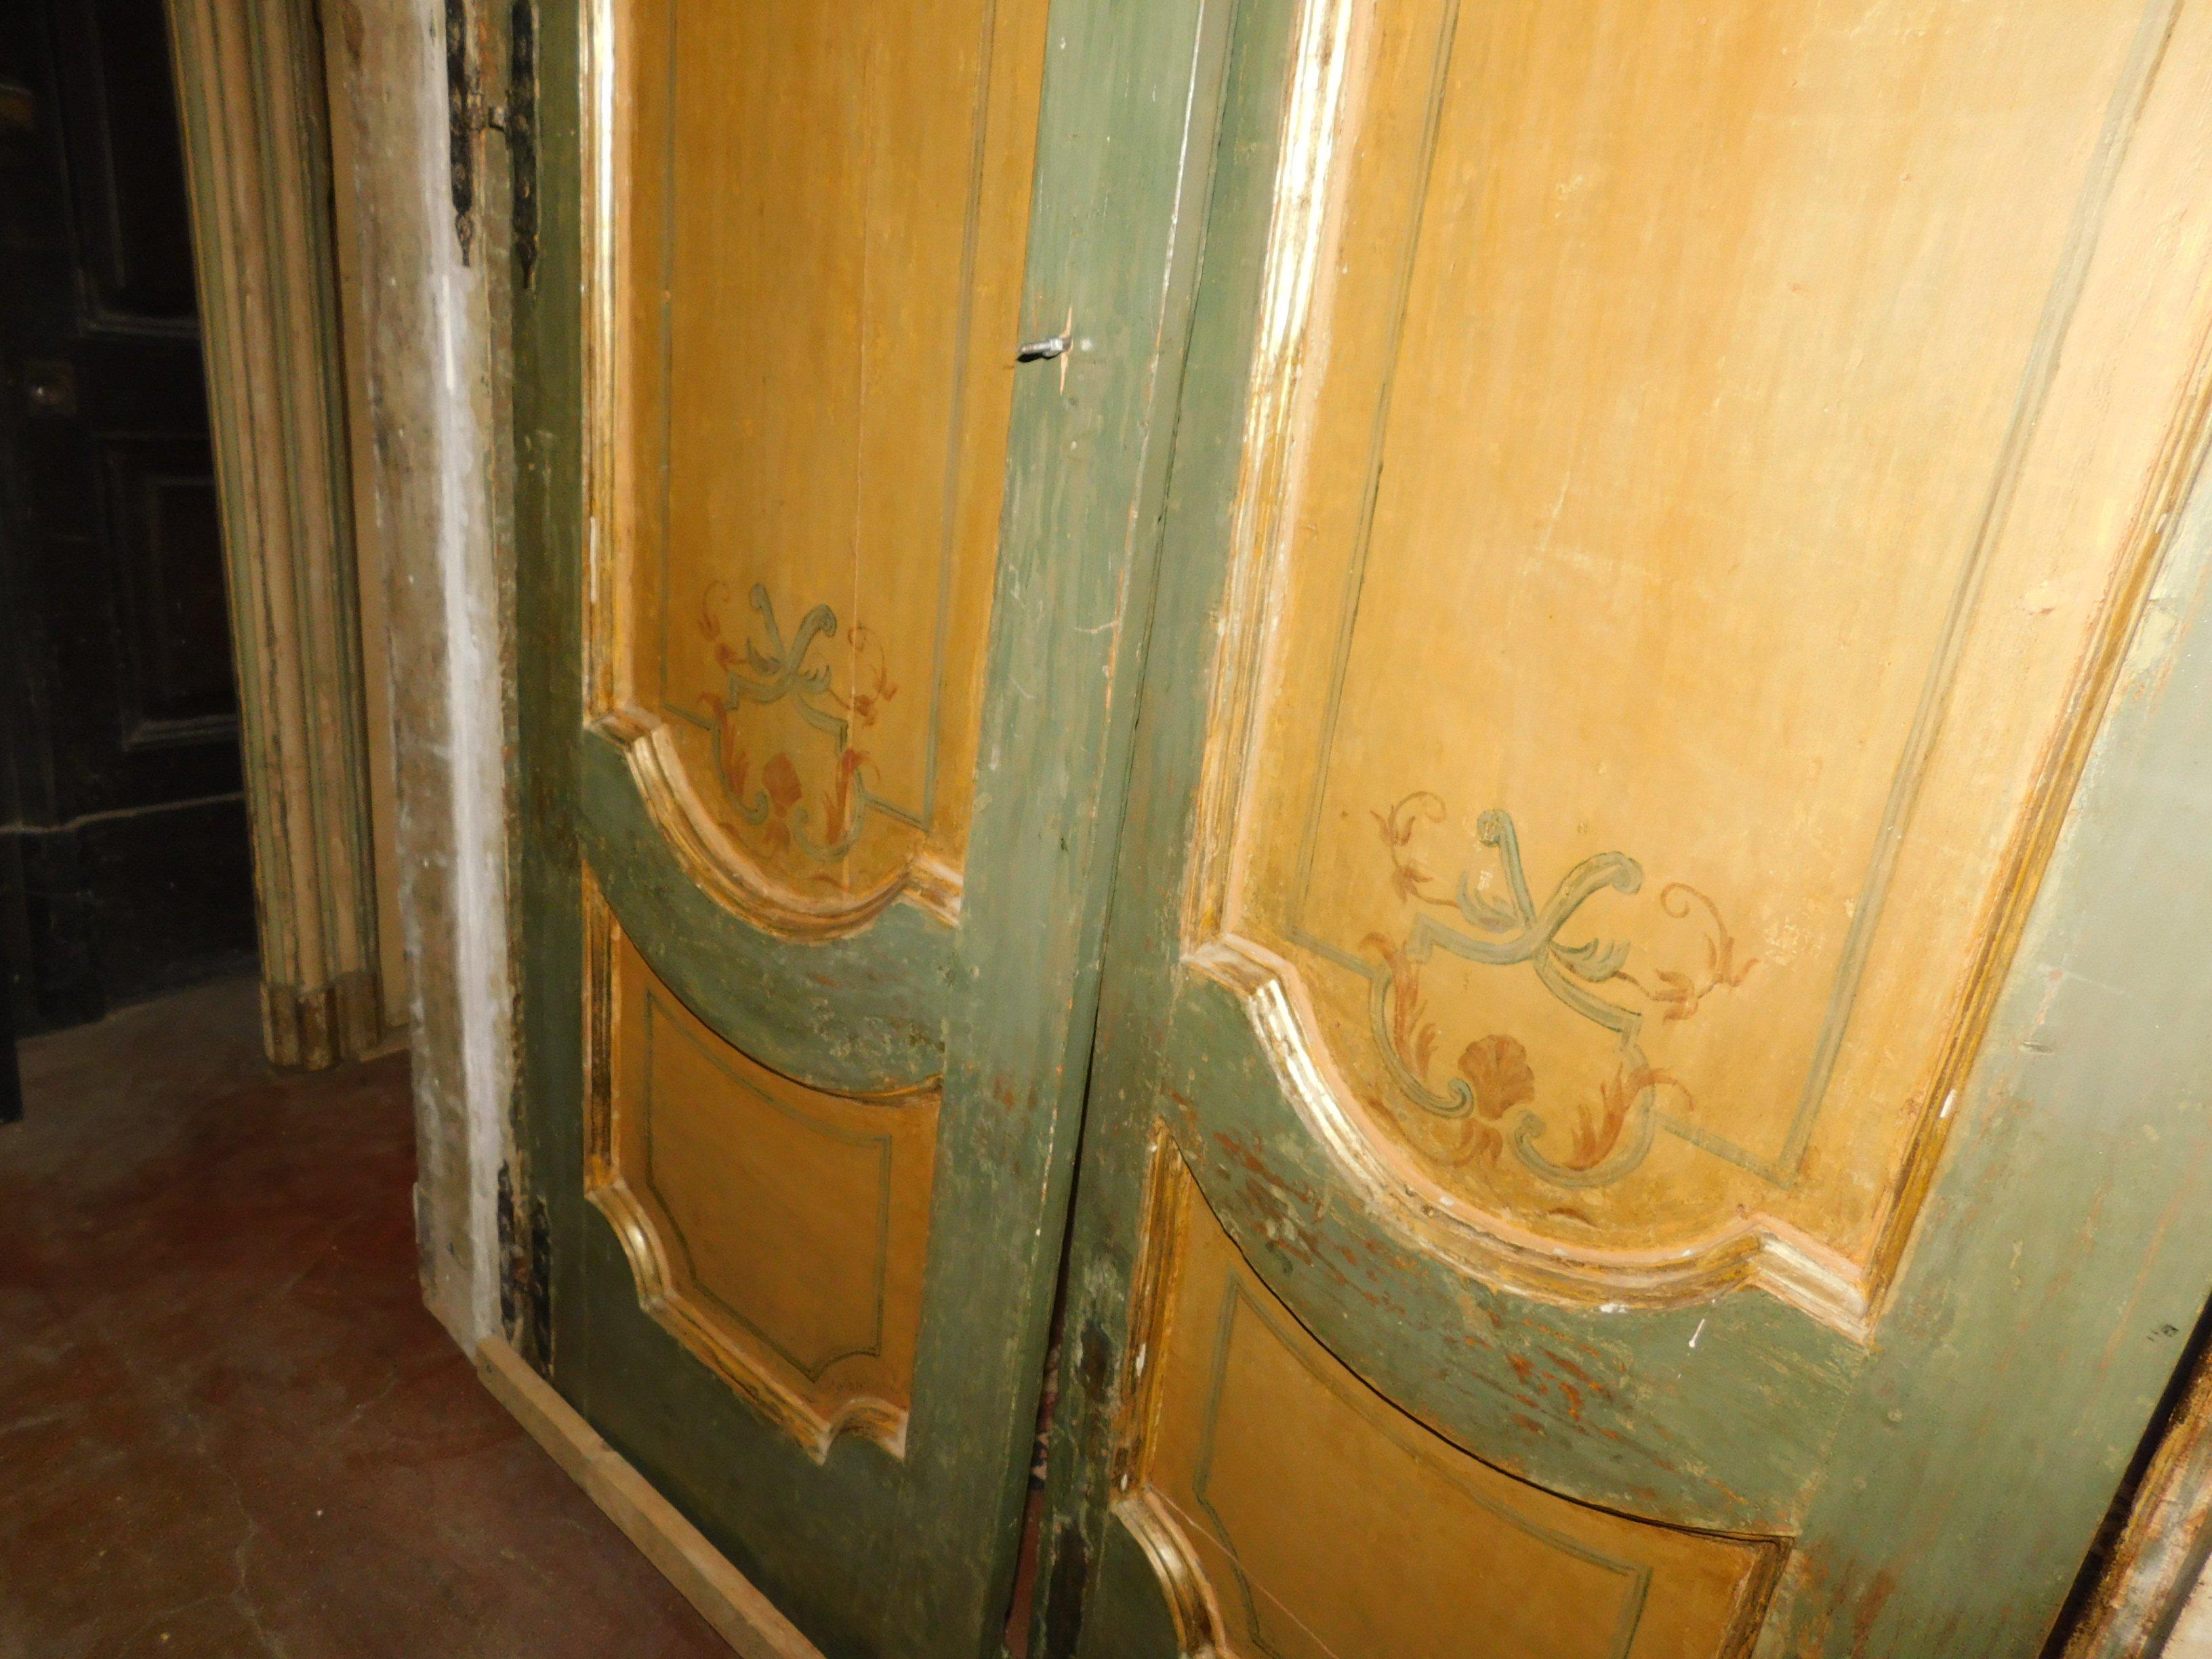 Antique Lacquered Gilded Door with Painted Panels, Complete Frame, 1700, Italy For Sale 2